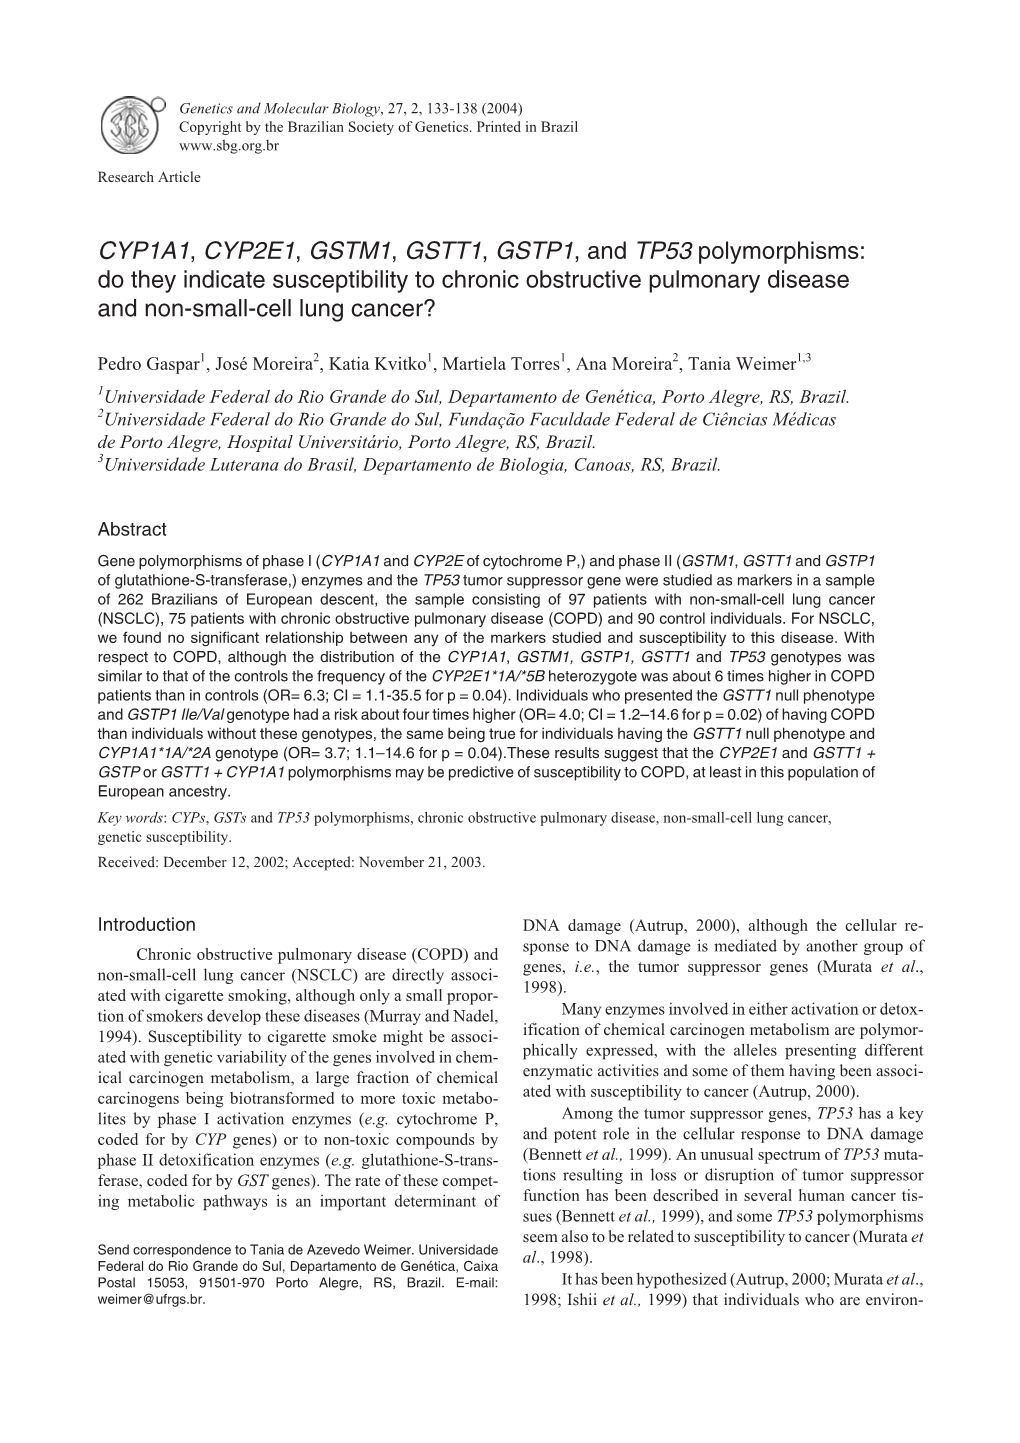 CYP1A1, CYP2E1, GSTM1, GSTT1, GSTP1, and TP53 Polymorphisms: Do They Indicate Susceptibility to Chronic Obstructive Pulmonary Disease and Non-Small-Cell Lung Cancer?